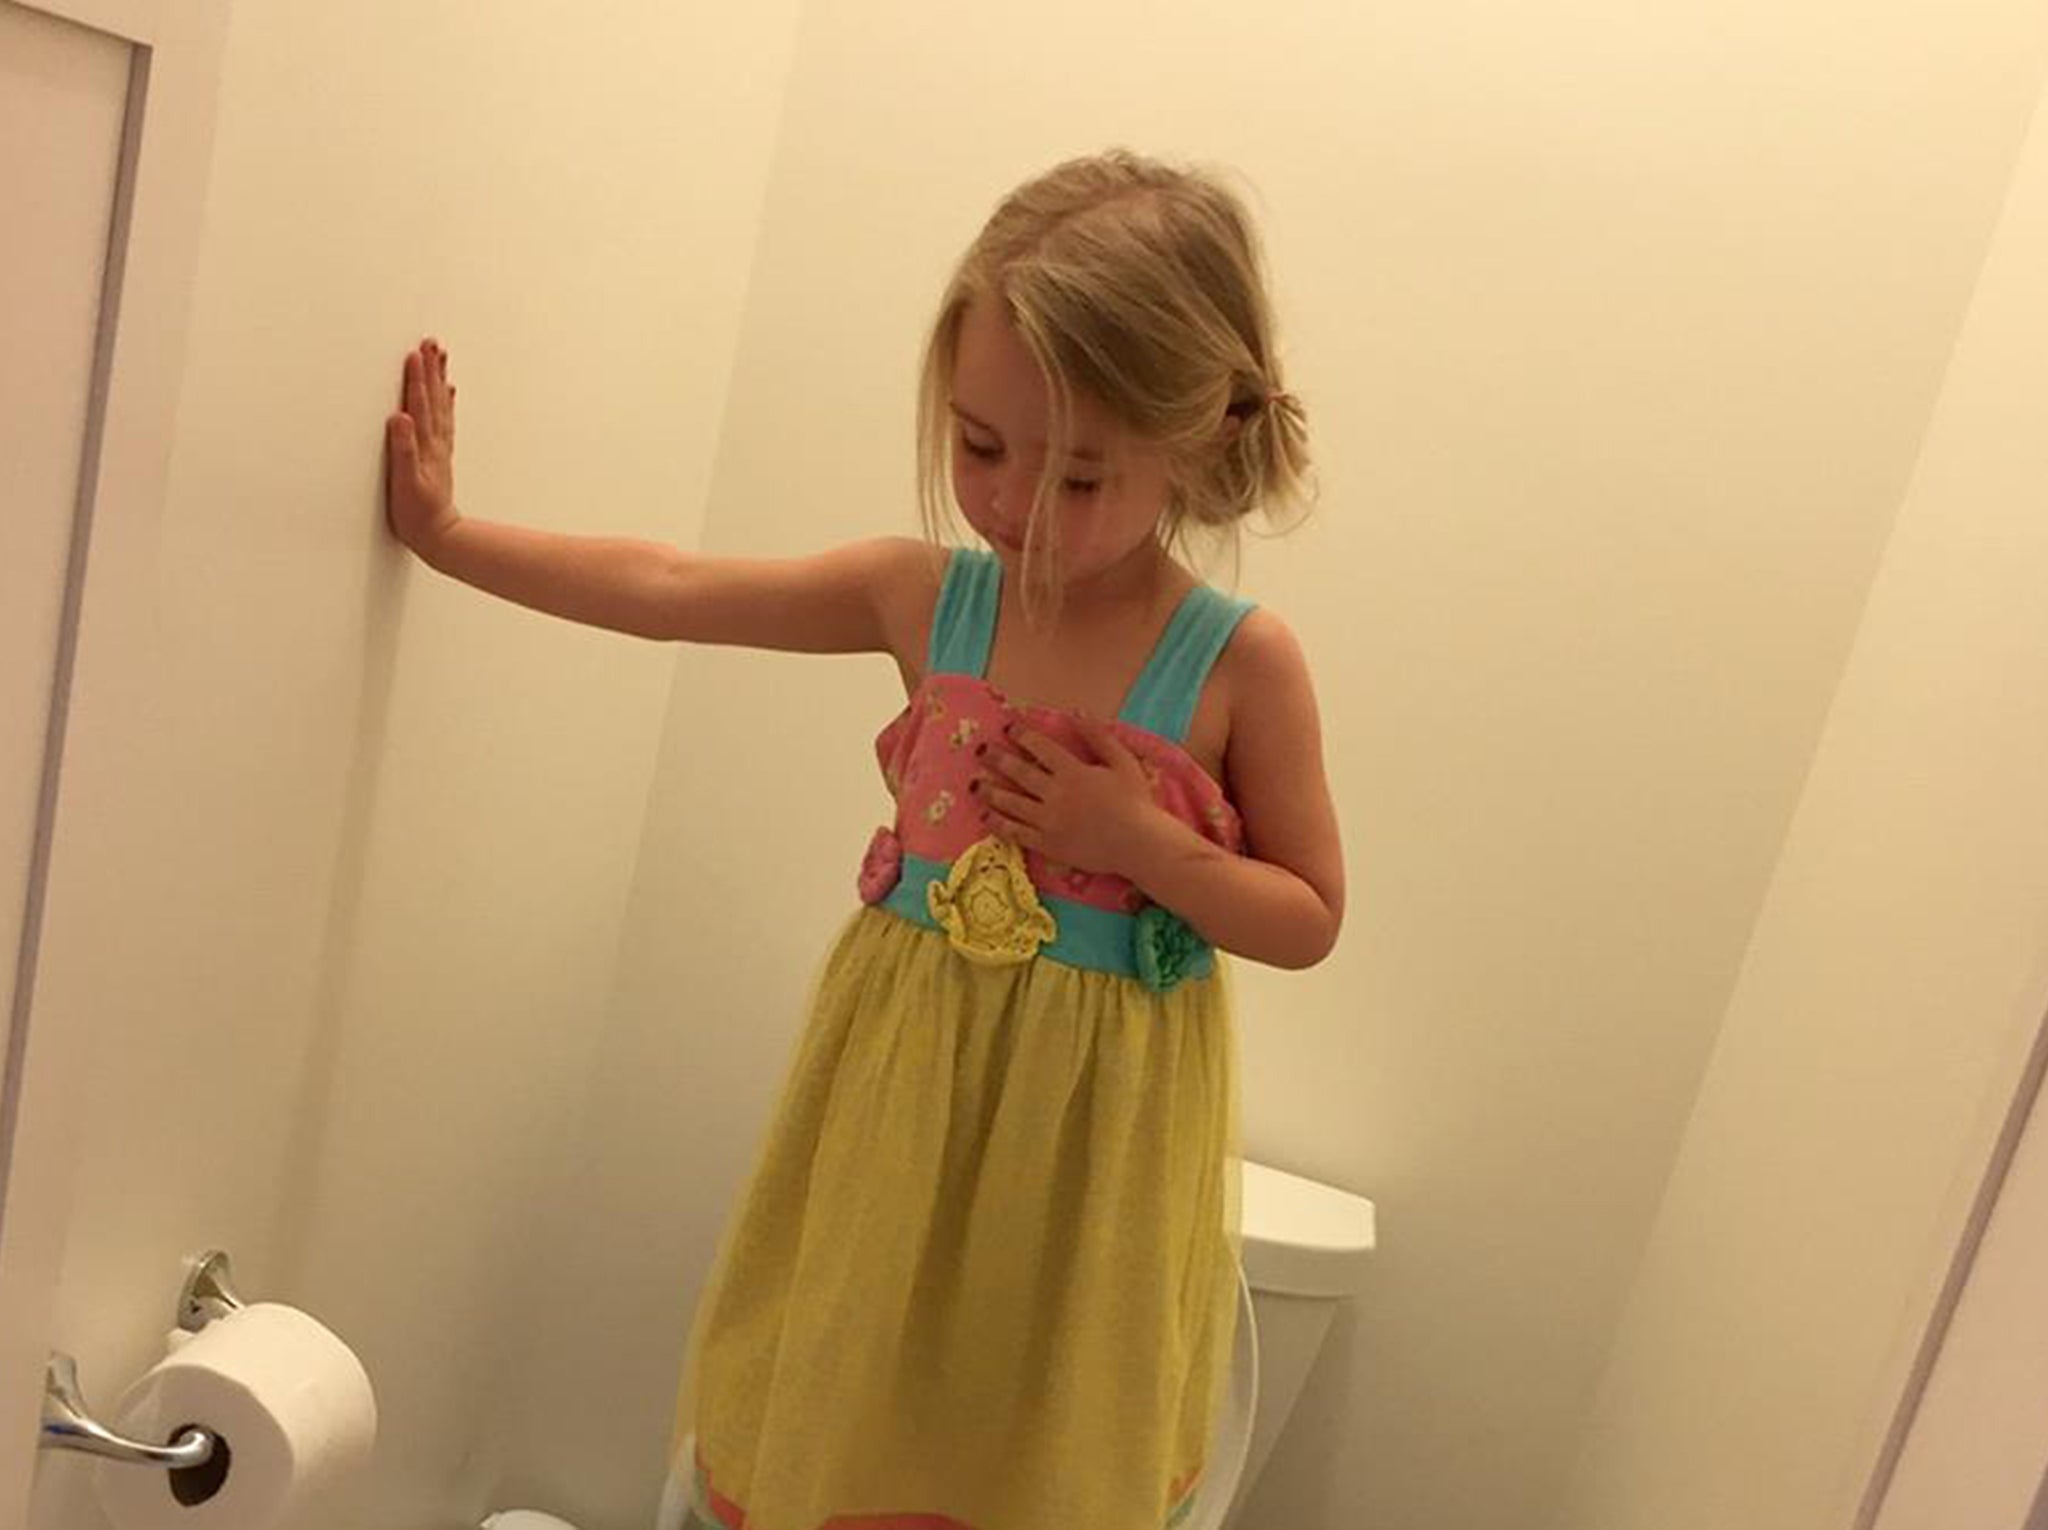 The little girl was taught to do this if a gunman attacked her pre-school while she was in the toilets